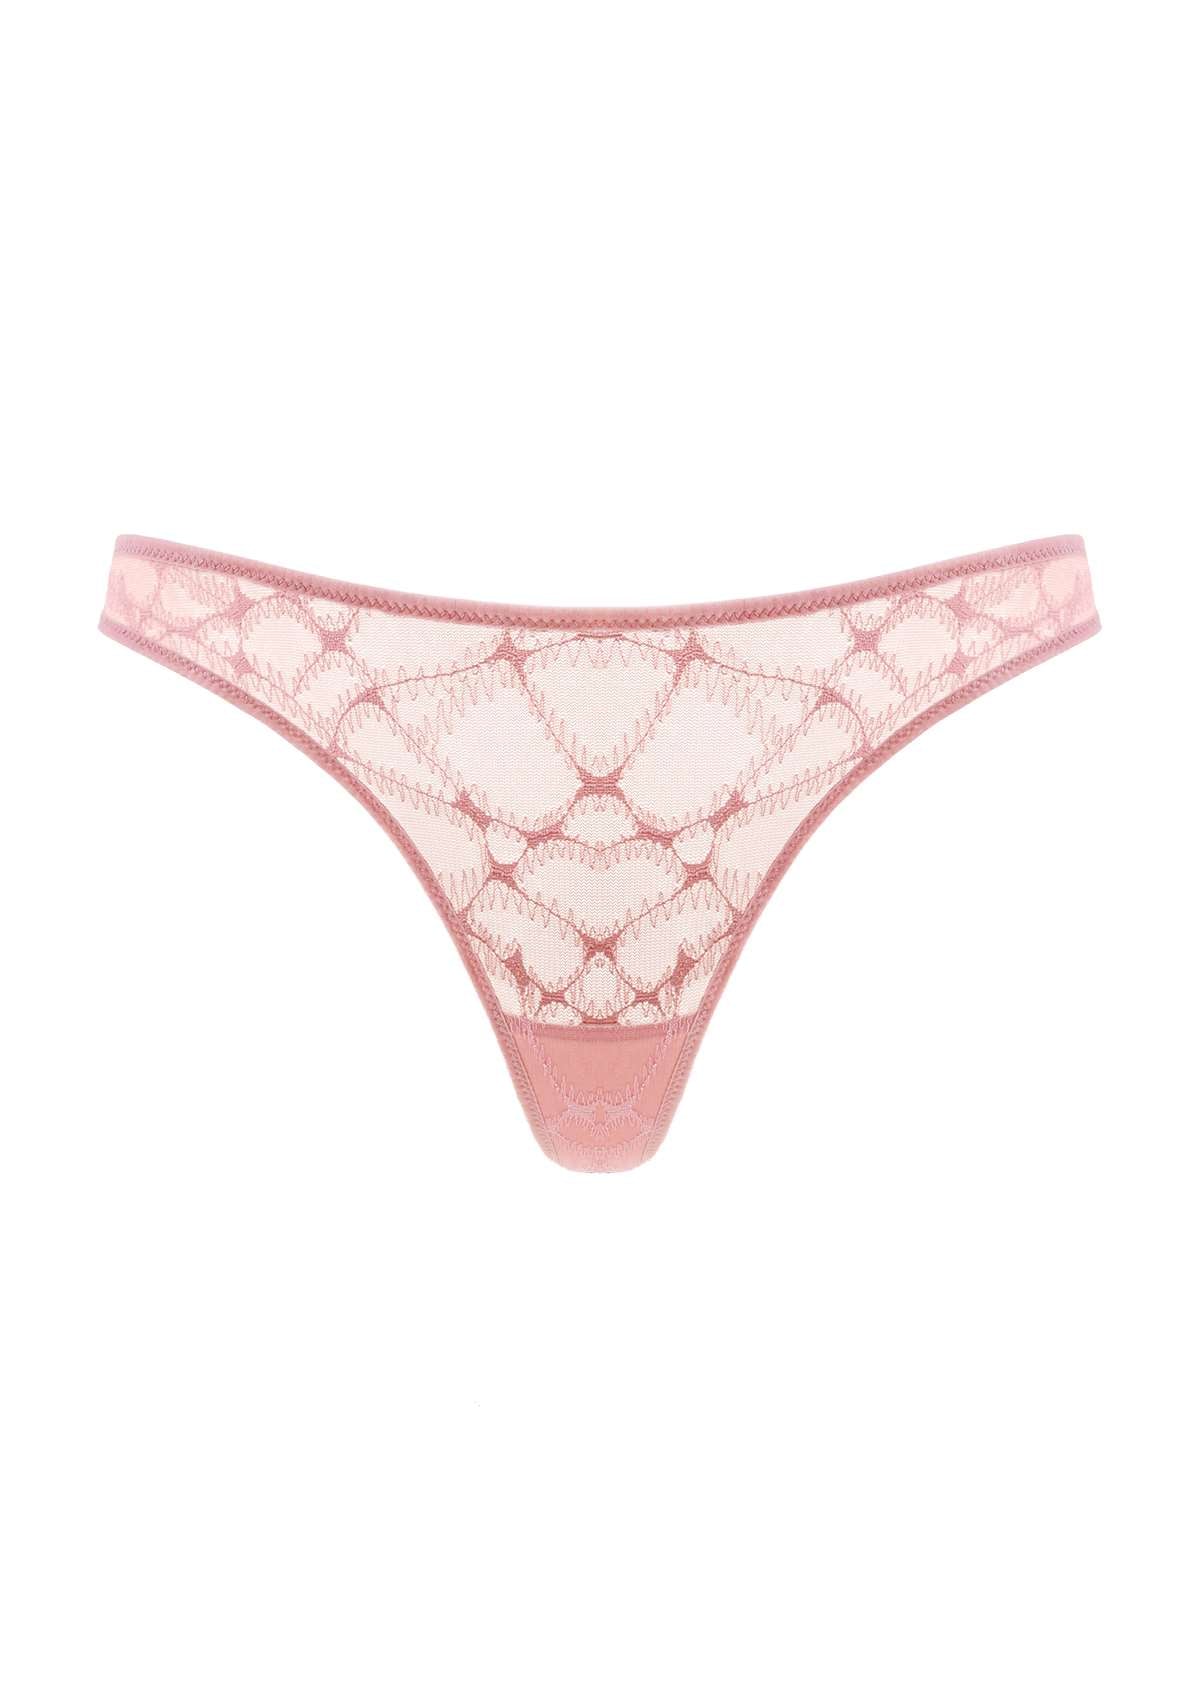 HSIA Soft Sexy Mesh Thong Underwear 3 Pack - M / Black+White+Light Coral